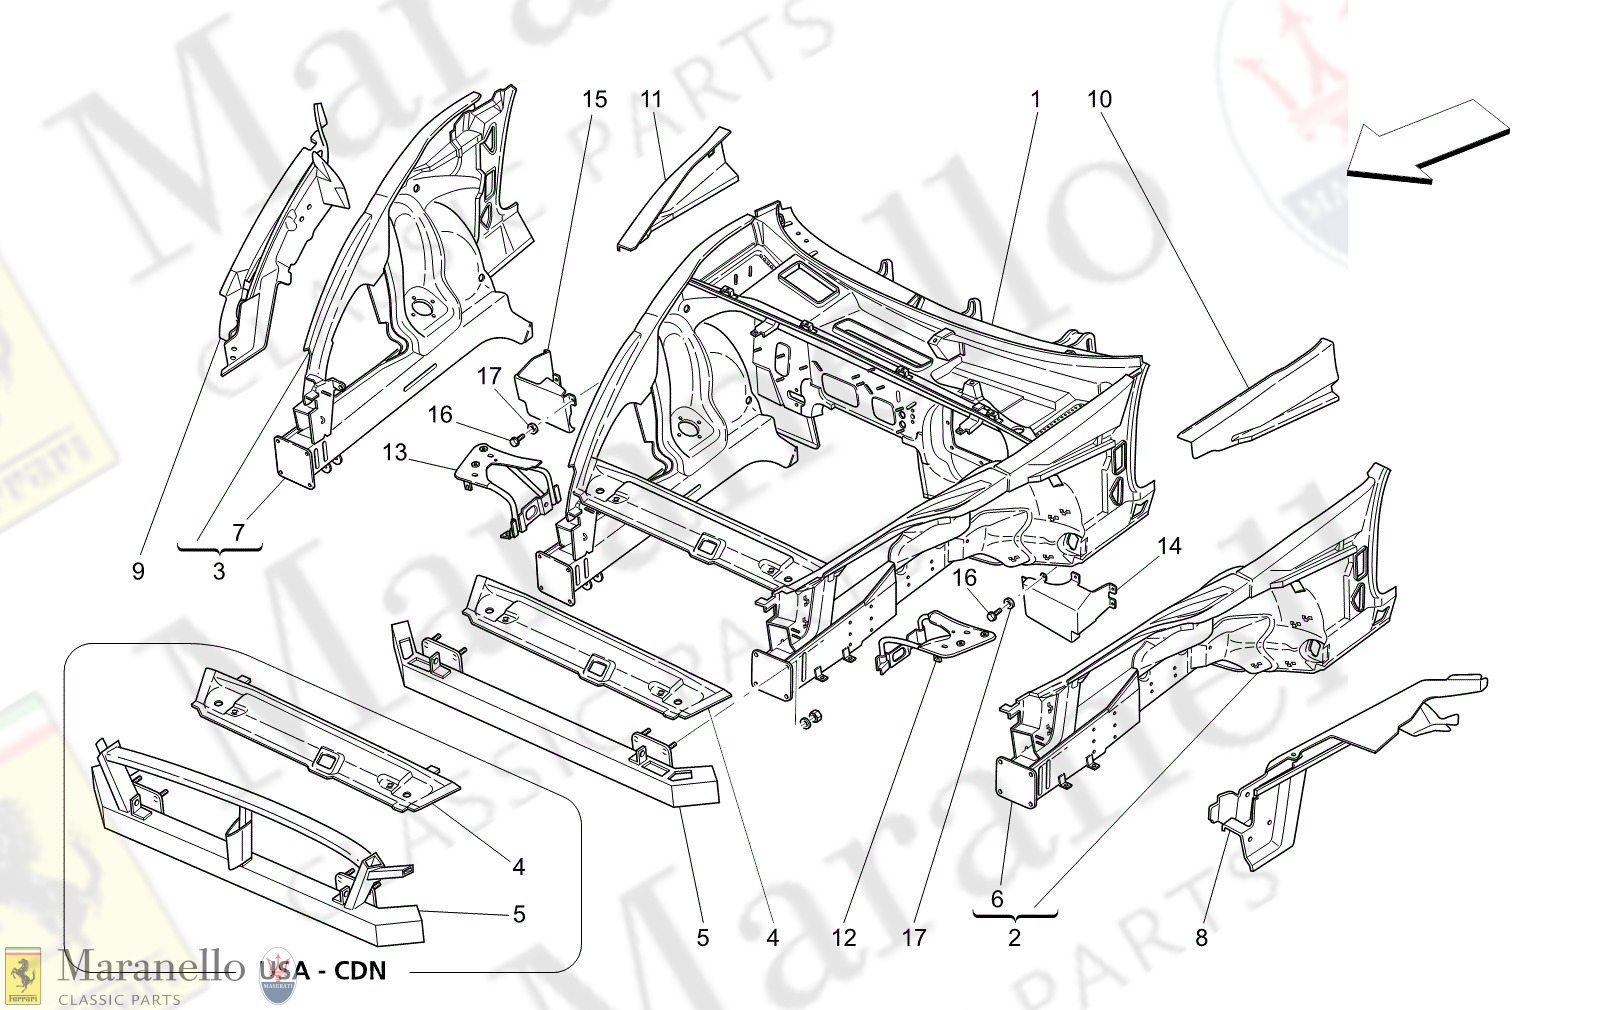 C9.03 - 1 - C903 - 1 Front Structural Frames And Sheet Panels